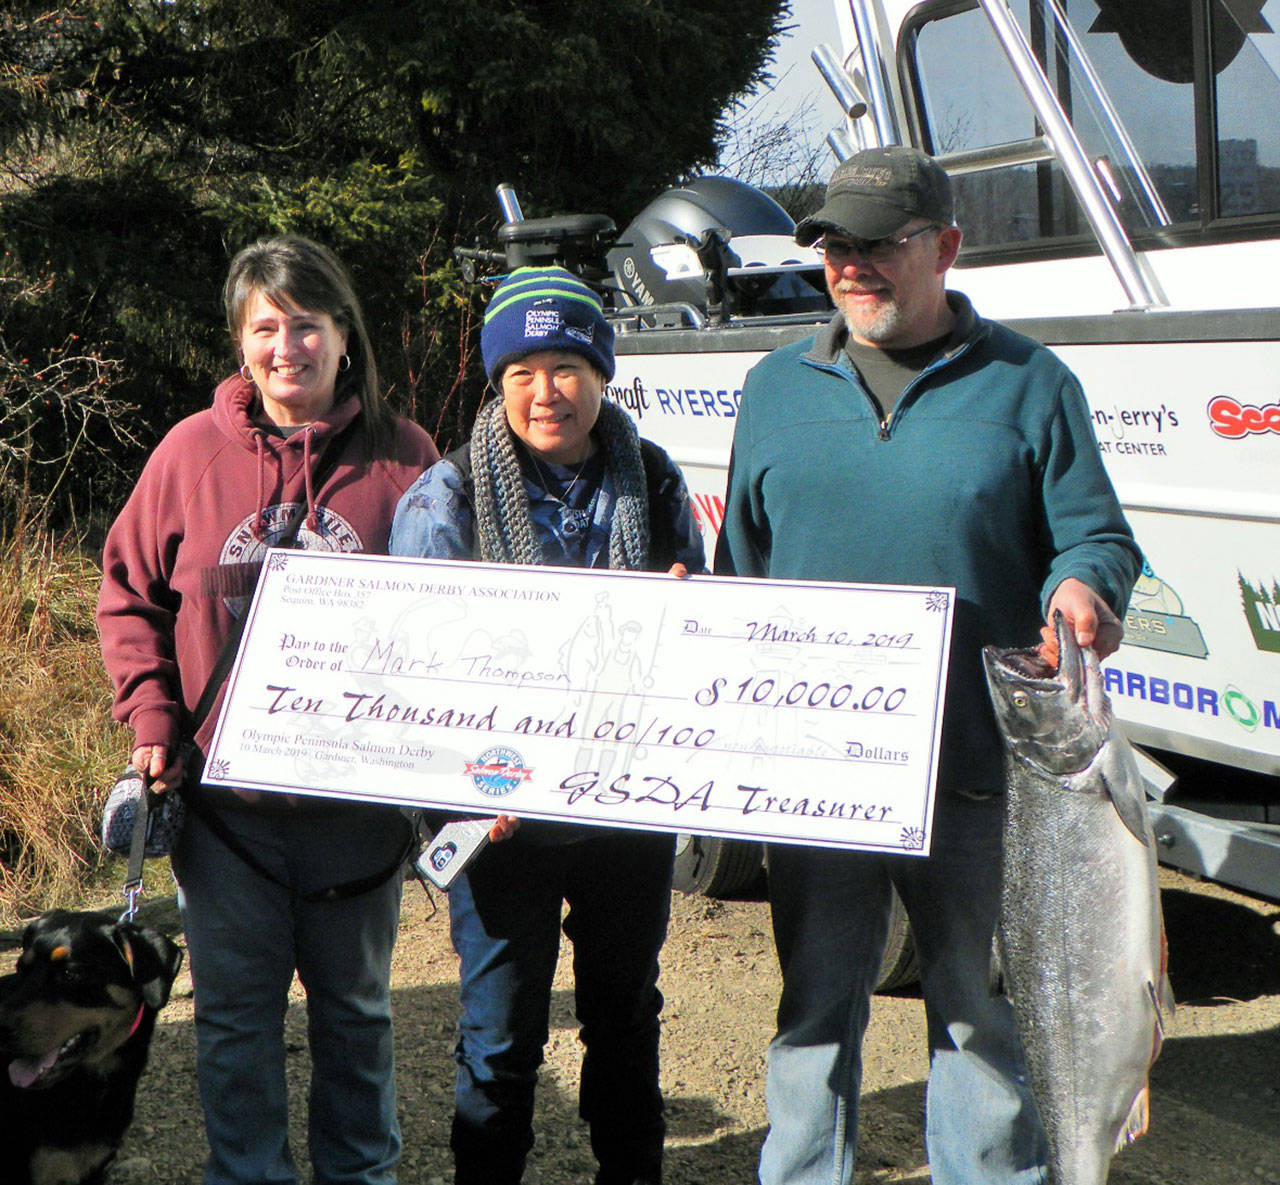 Mark Thompson, right, holds his 19.35-pound blackmouth salmon that earned the $10,000 first prize at the 2019 Olympic Peninsula Salmon Derby. His wife Kristi Thompson is at left, with Kathy Watrous, Gardiner Salmon Derby Association President, holding Thompson’s $10,000 check. The trio is standing in front of the 2019 Northwest Salmon Derby Series Grand Prize Boat valued at $75,000; each derby entrant received an entry for the boat drawing which will be held in September. Submitted photo